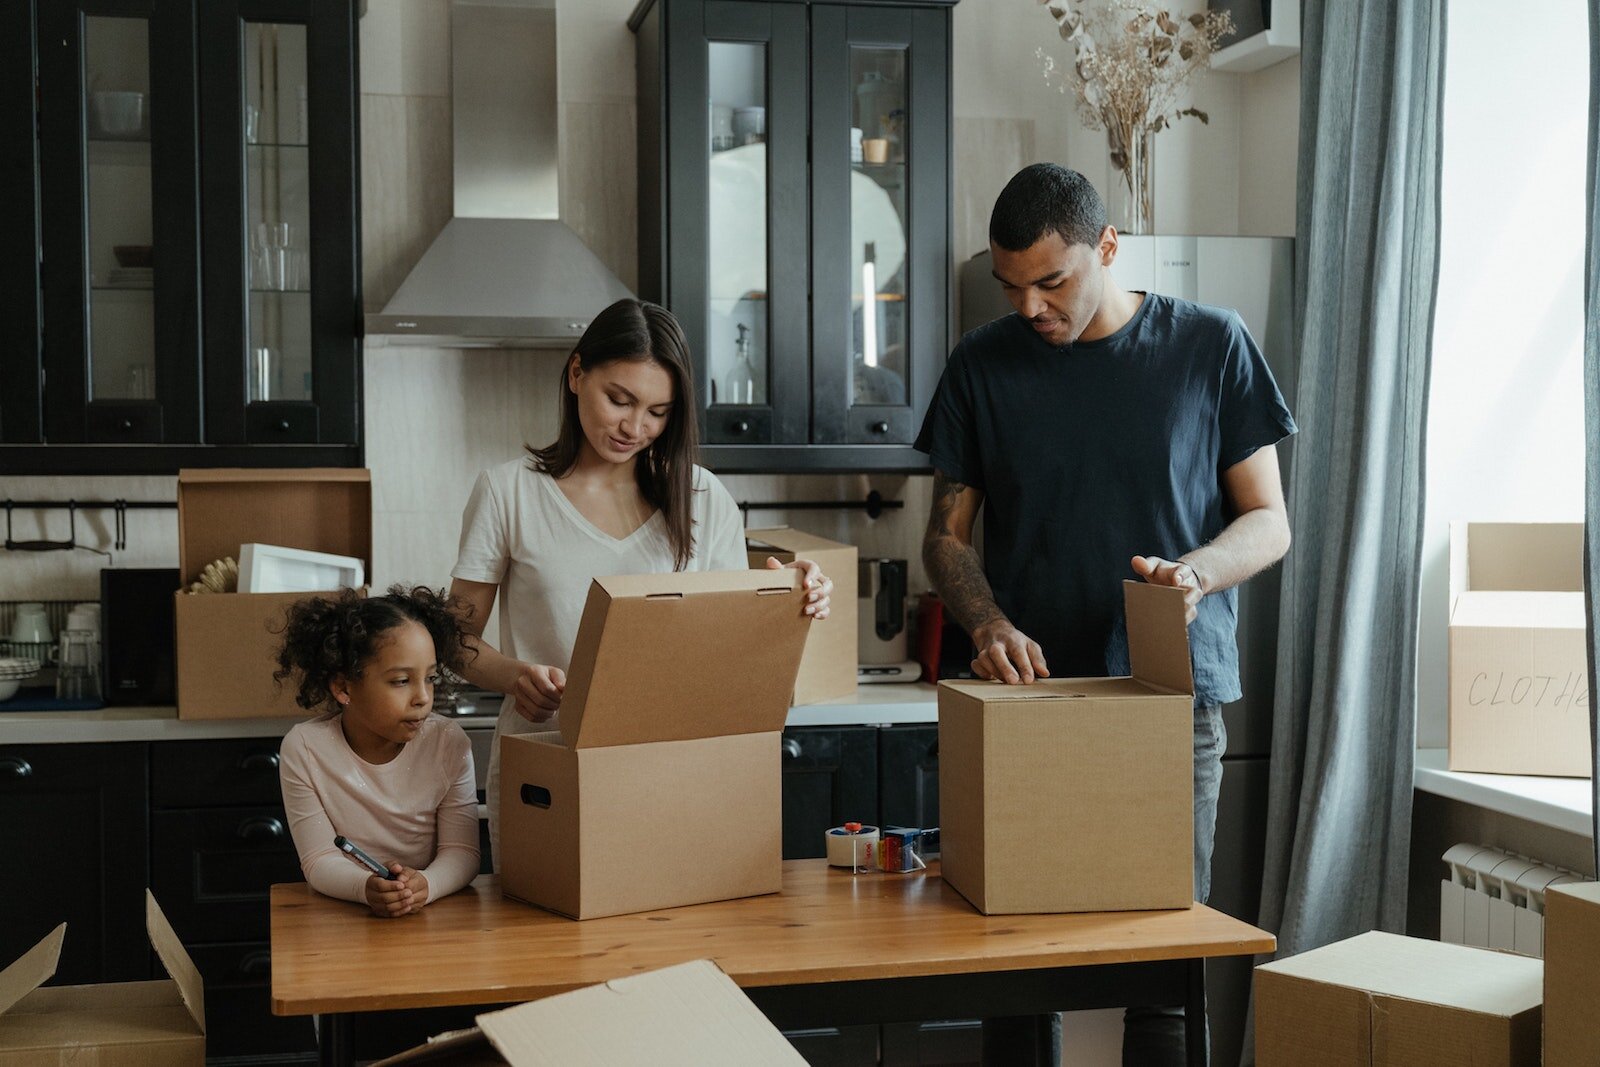 Blüm Relocation Technologies seeks to serve movers by digitally relieving some of the stress of relocation.